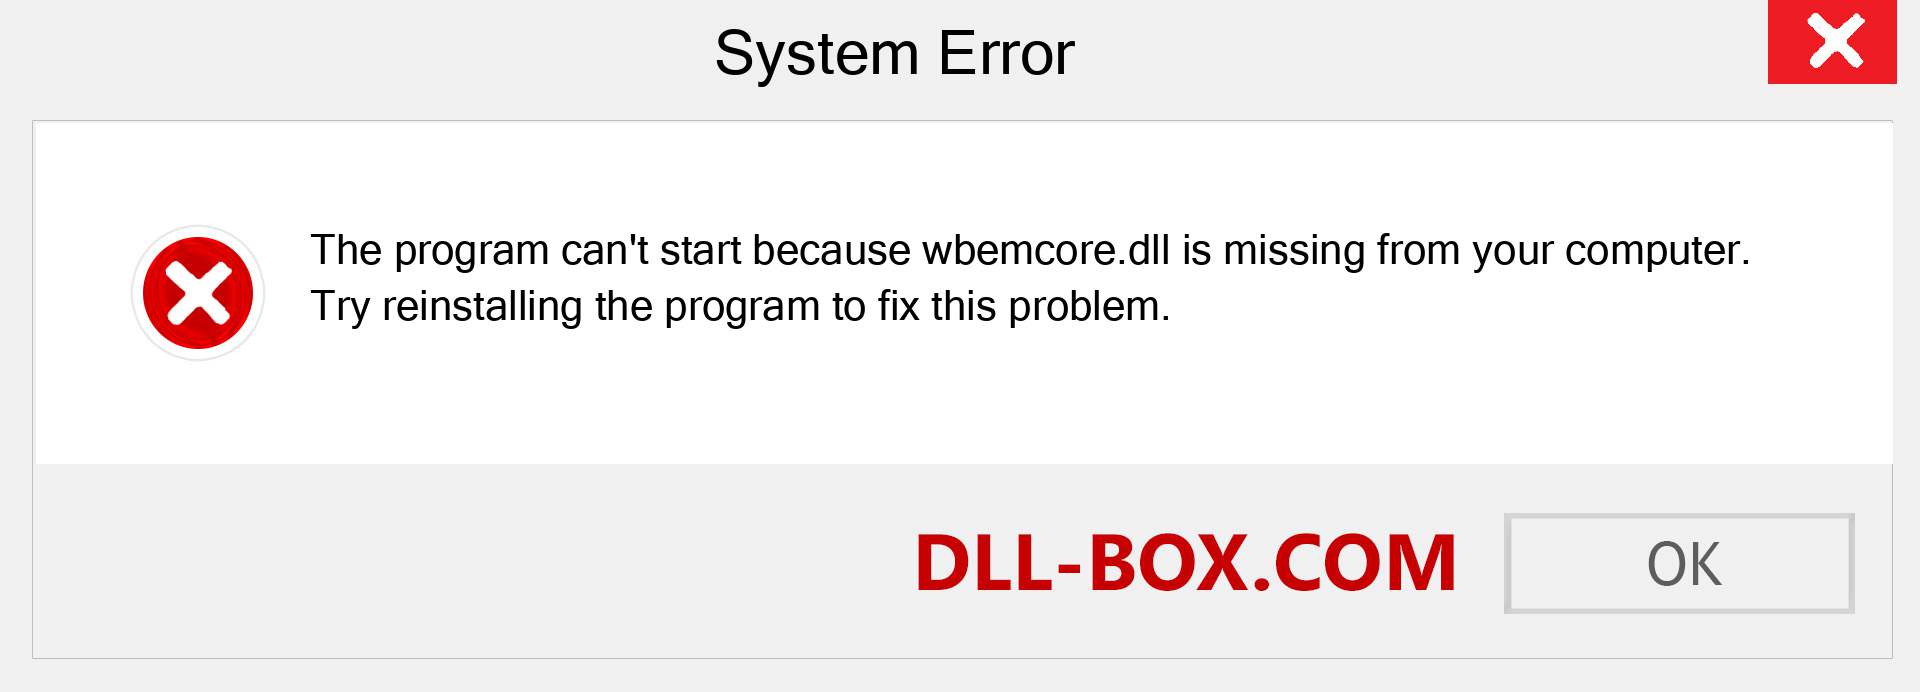  wbemcore.dll file is missing?. Download for Windows 7, 8, 10 - Fix  wbemcore dll Missing Error on Windows, photos, images